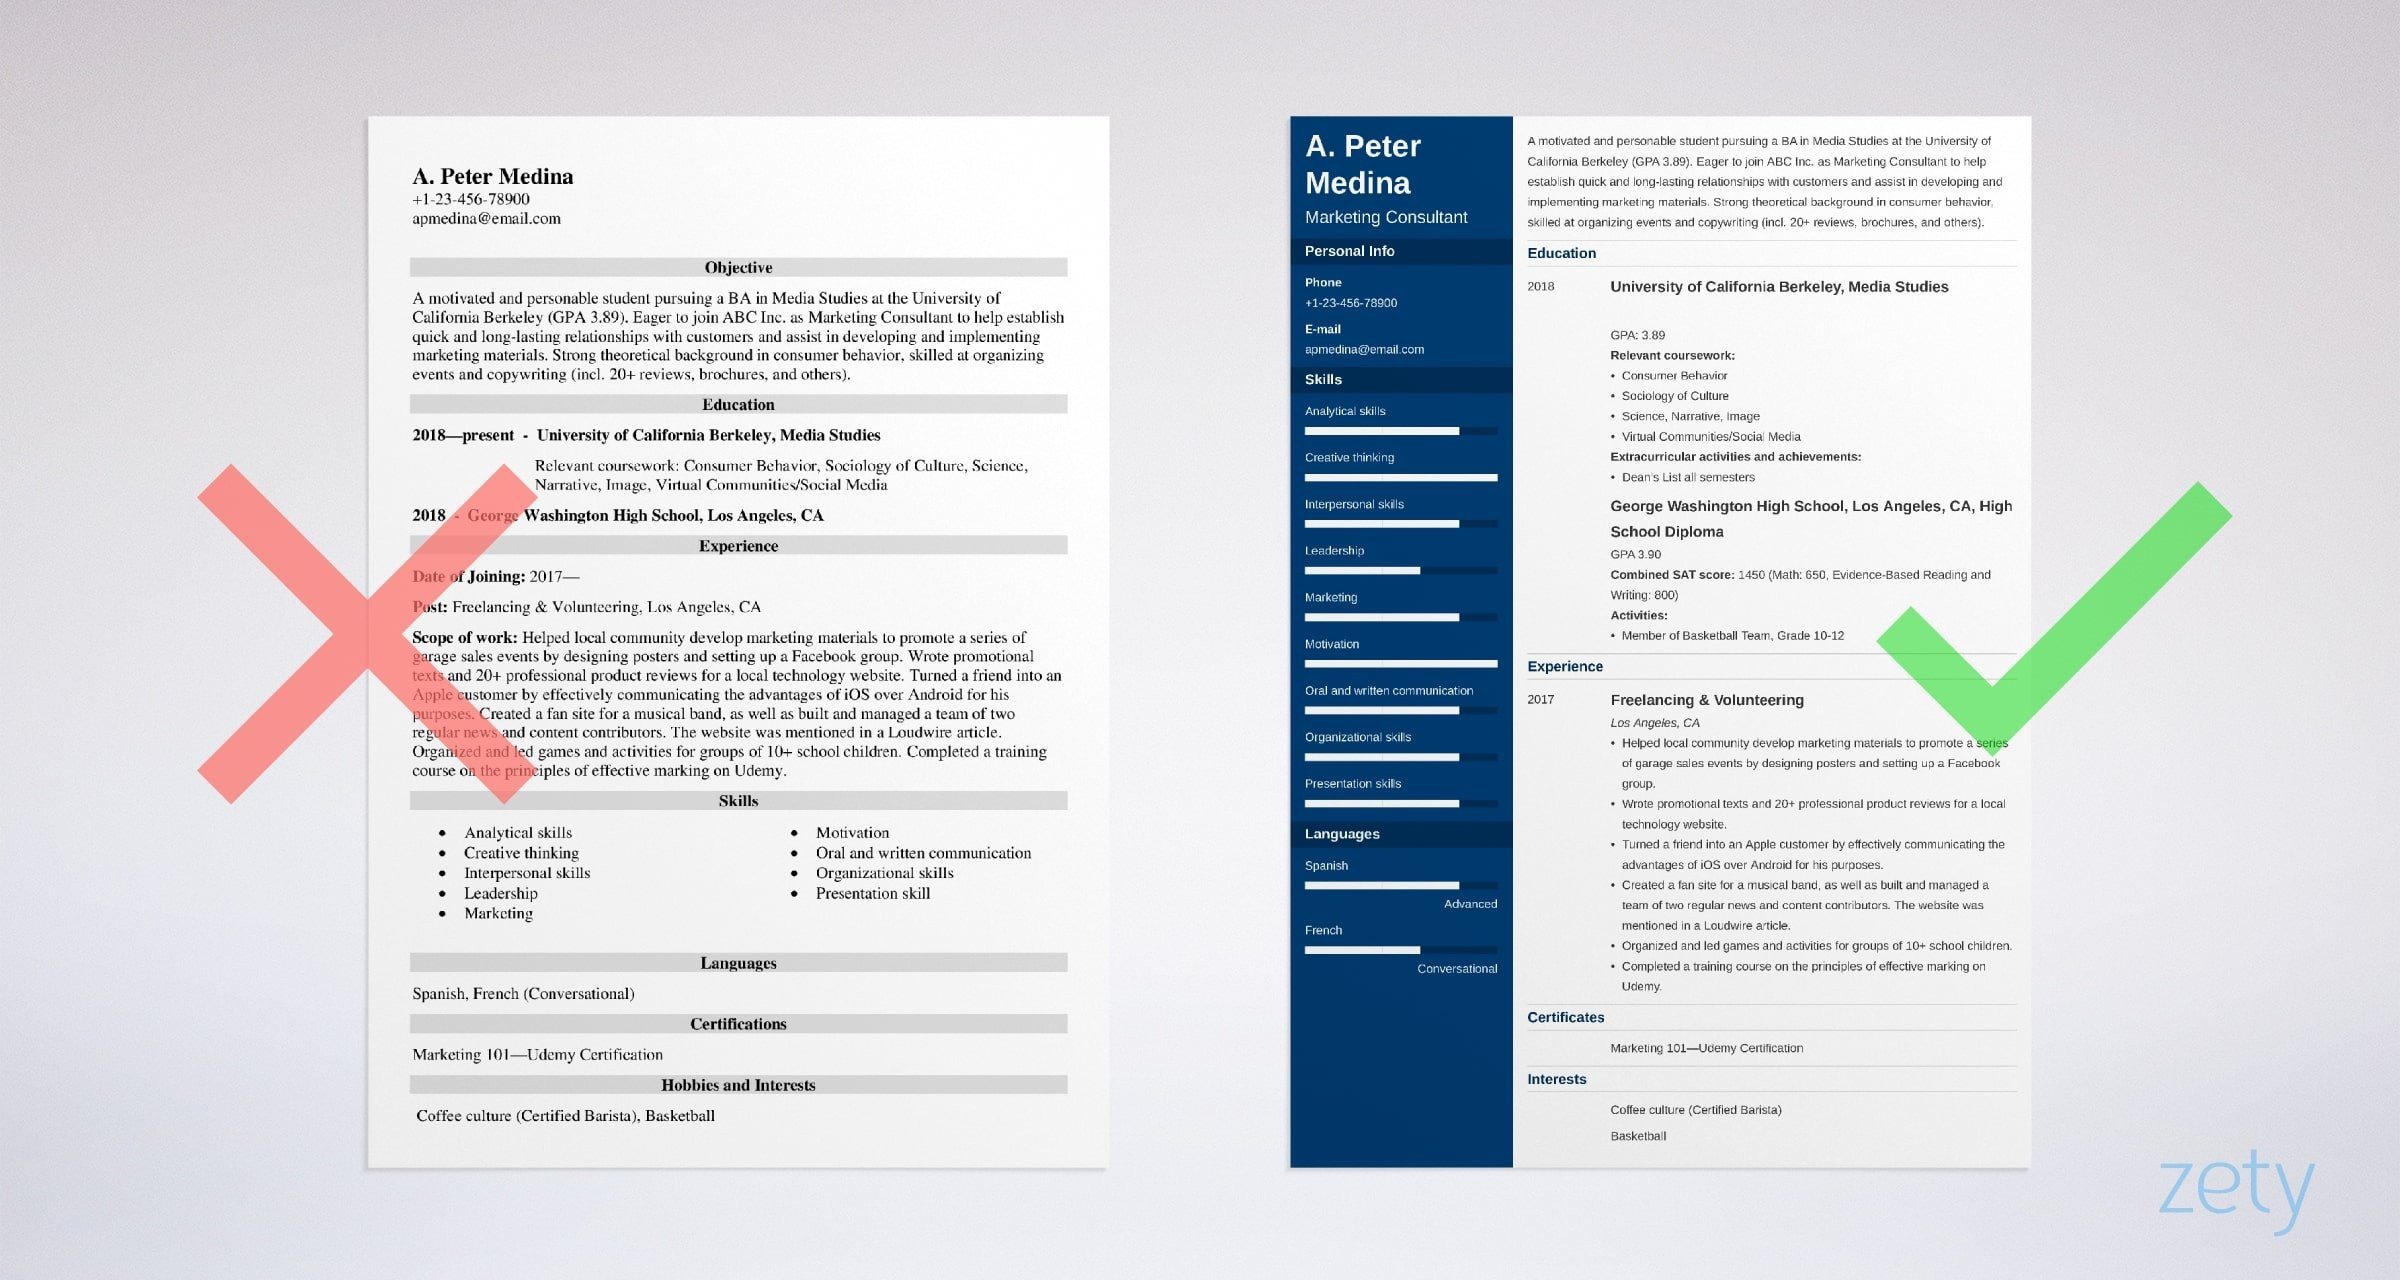 Sample Resume Career Change No Experience How to Write A Resume with No Experience & Get the First Job